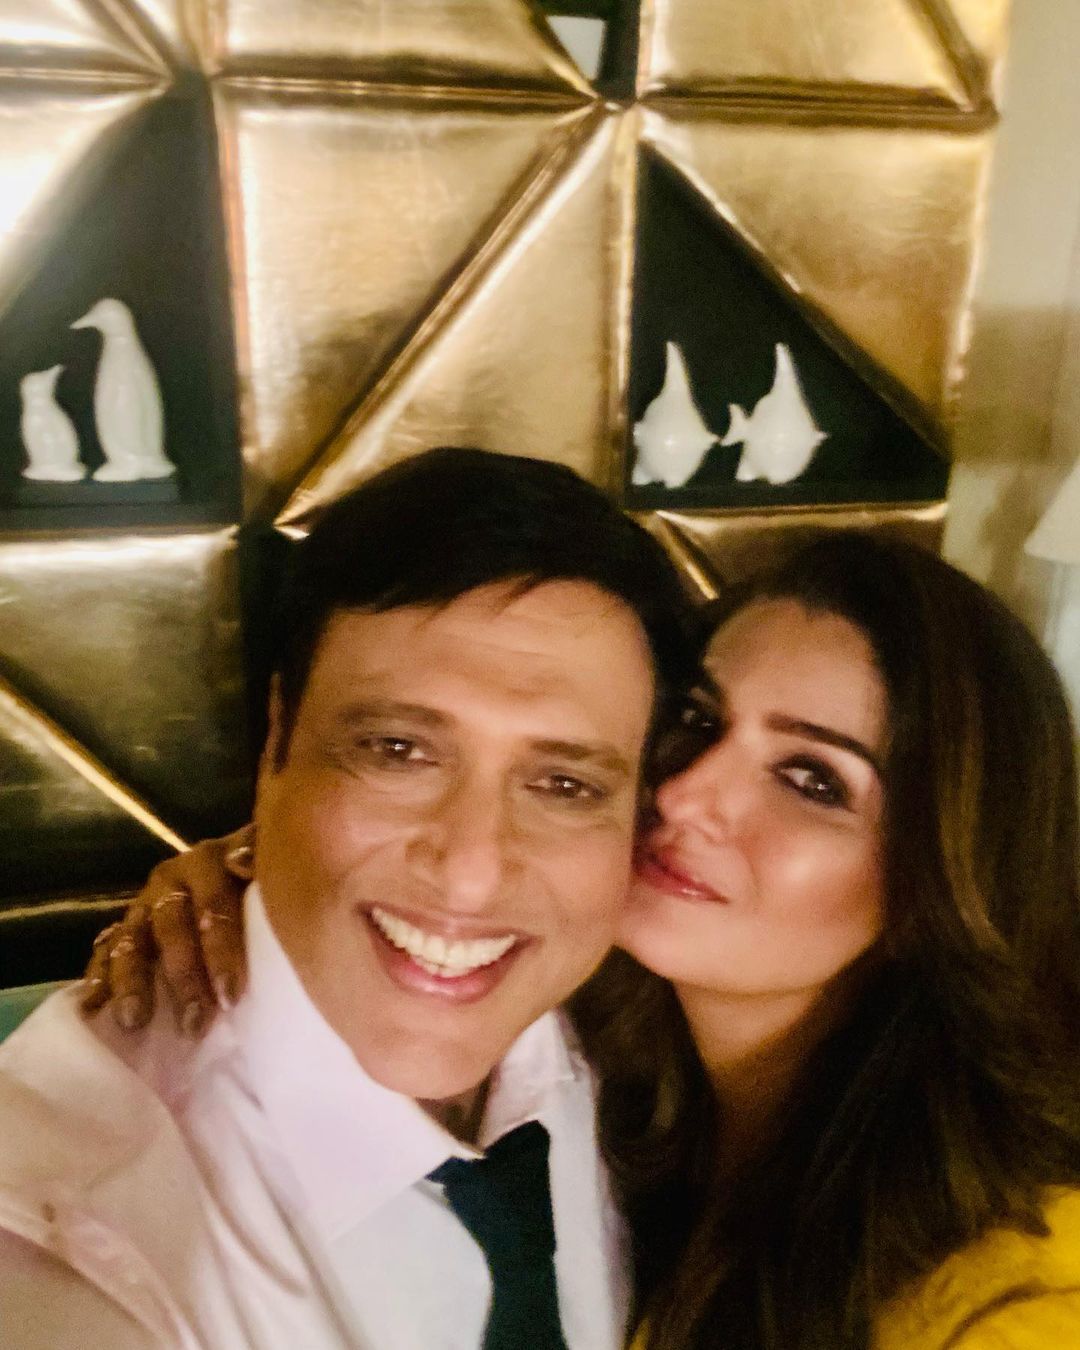 Raveena Tandon has a 'grand reunion' with Govinda, fans get excited as she teases about an upcoming project together